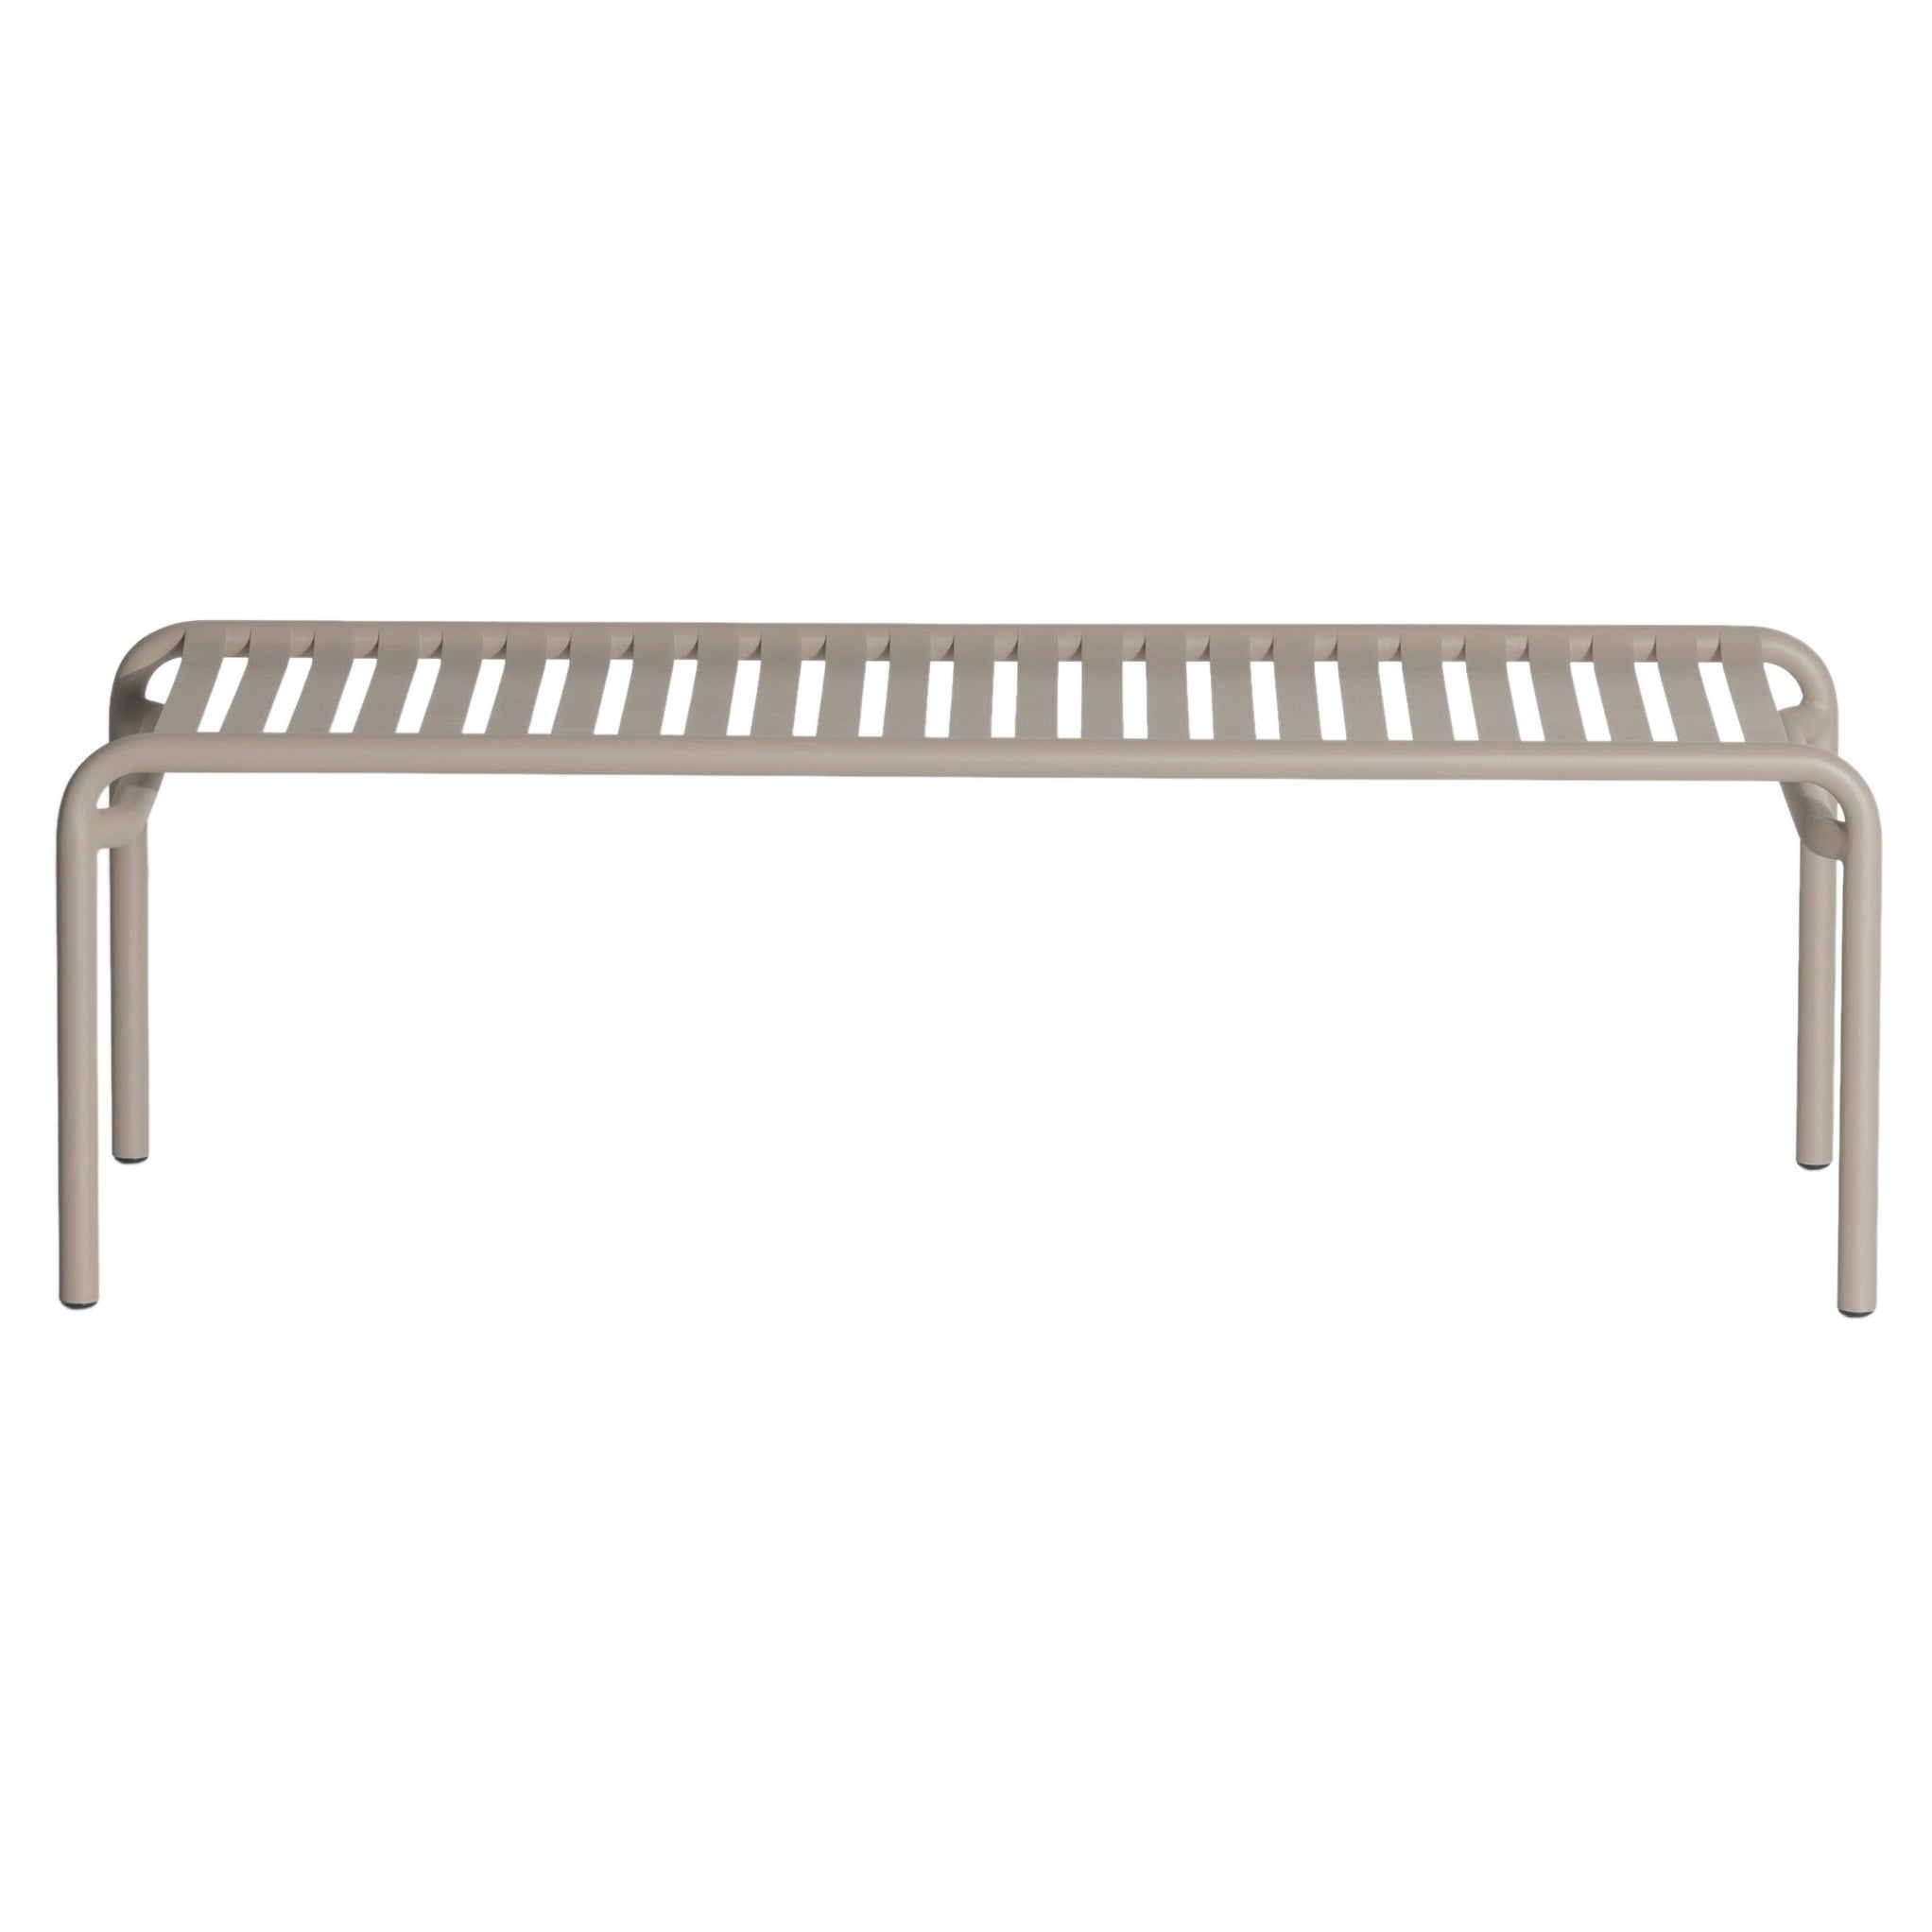 Petite Friture Week-End Long Coffee Table in Dune Aluminium, 2017 For Sale